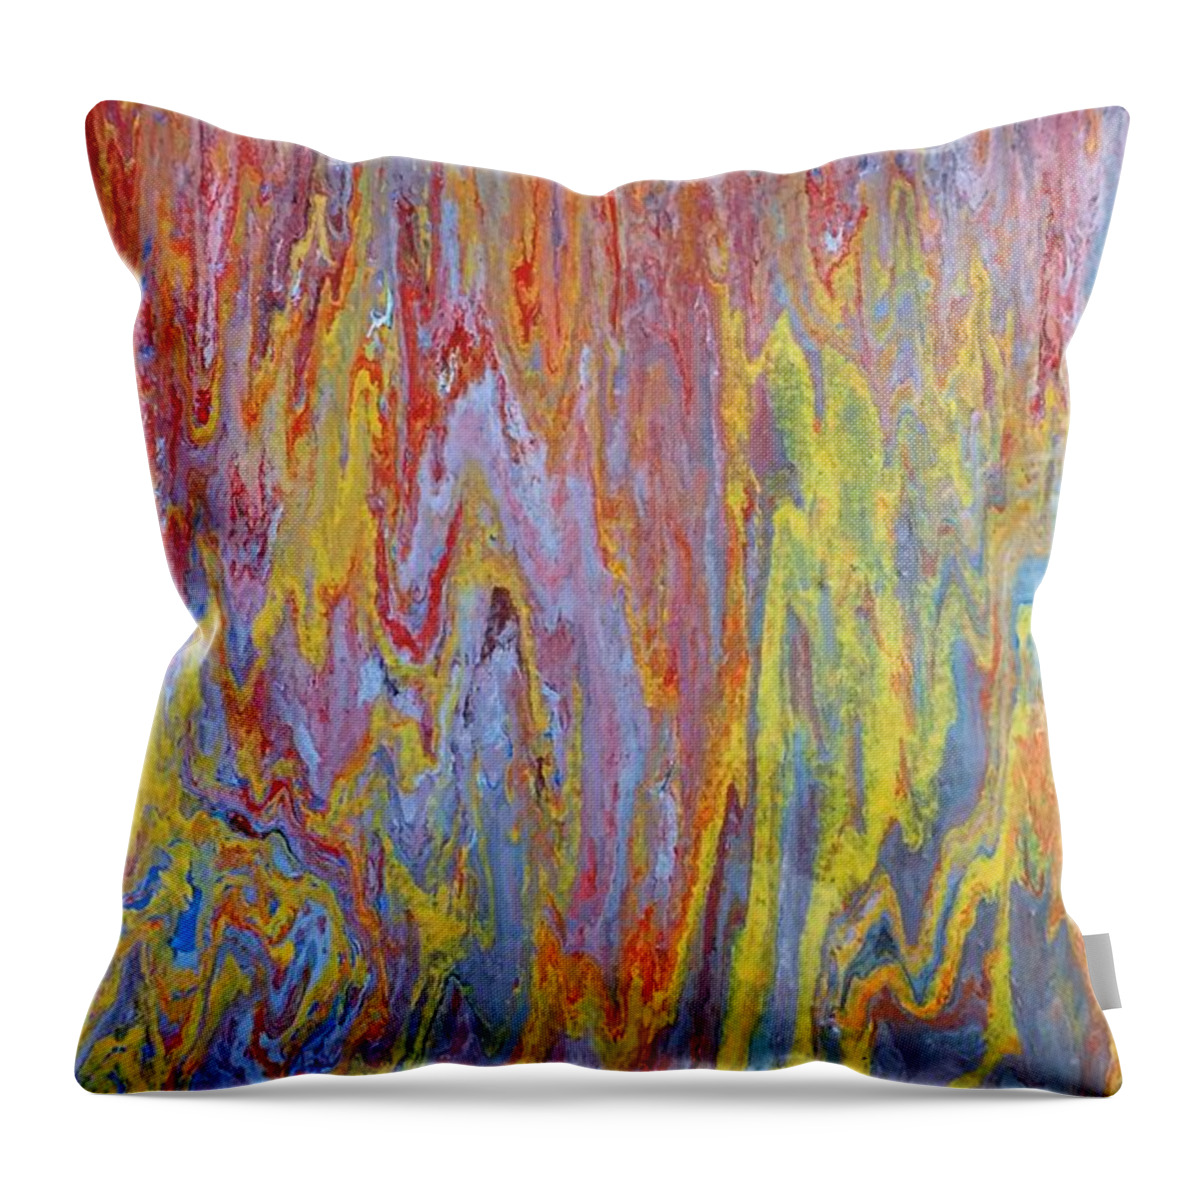 Abstract Expressionist Throw Pillow featuring the painting Yellow figures over red by Greg Powell